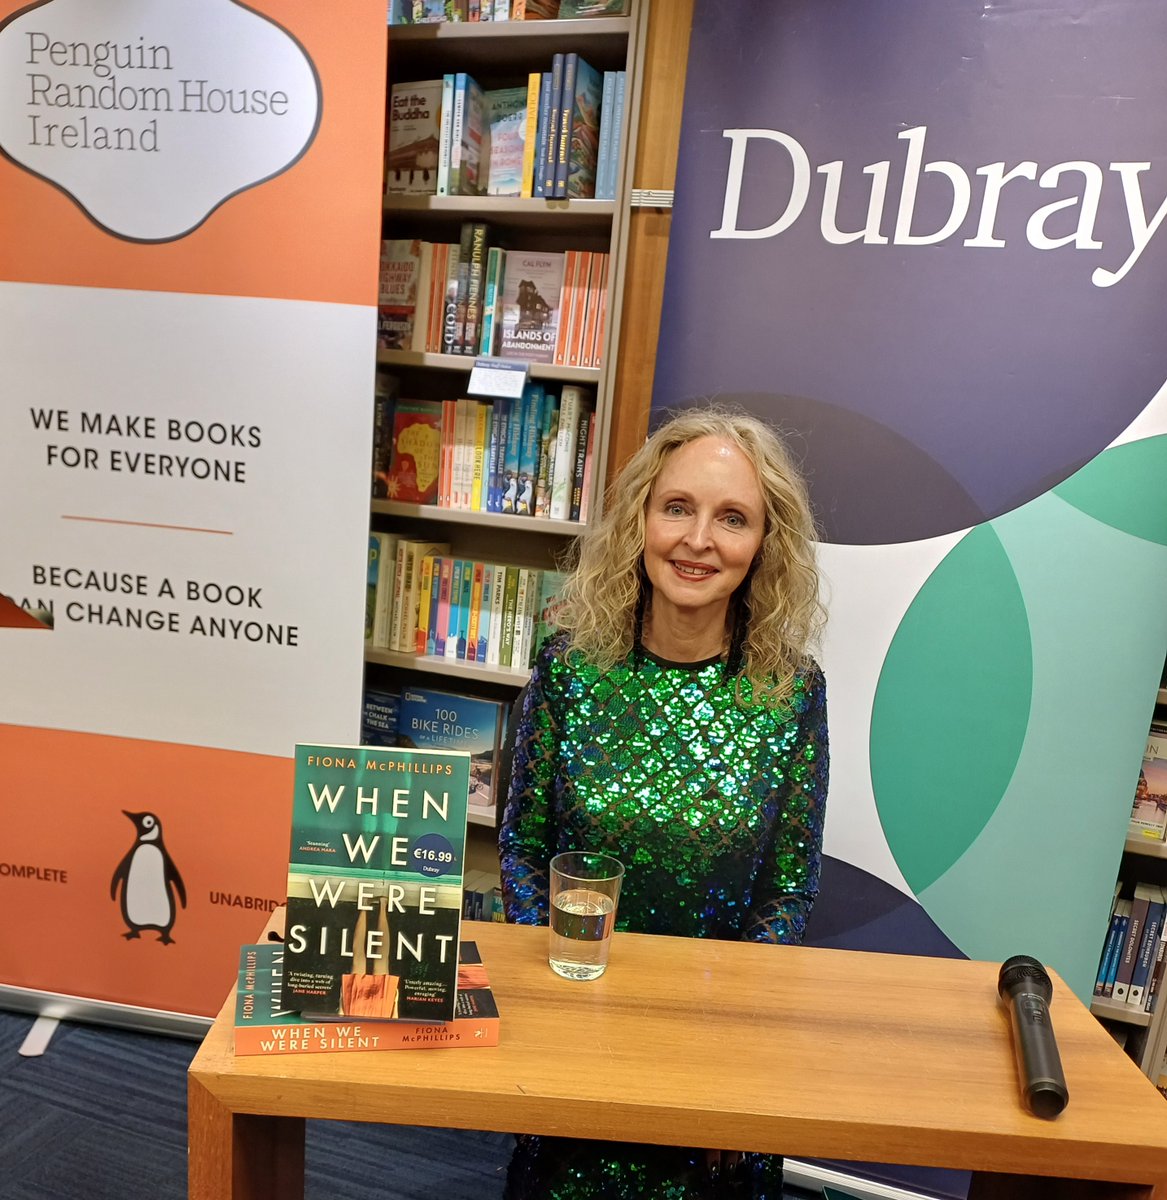 We’re very proud of our recent DCU MA Creative Writing graduate Fiona McPhillips, as she launches her brilliant debut novel, When We Were Silent. Published by Bantam (Penguin Random House), available at all good book shops now. Huge congratulations, Fiona. penguin.co.uk/books/456675/w…